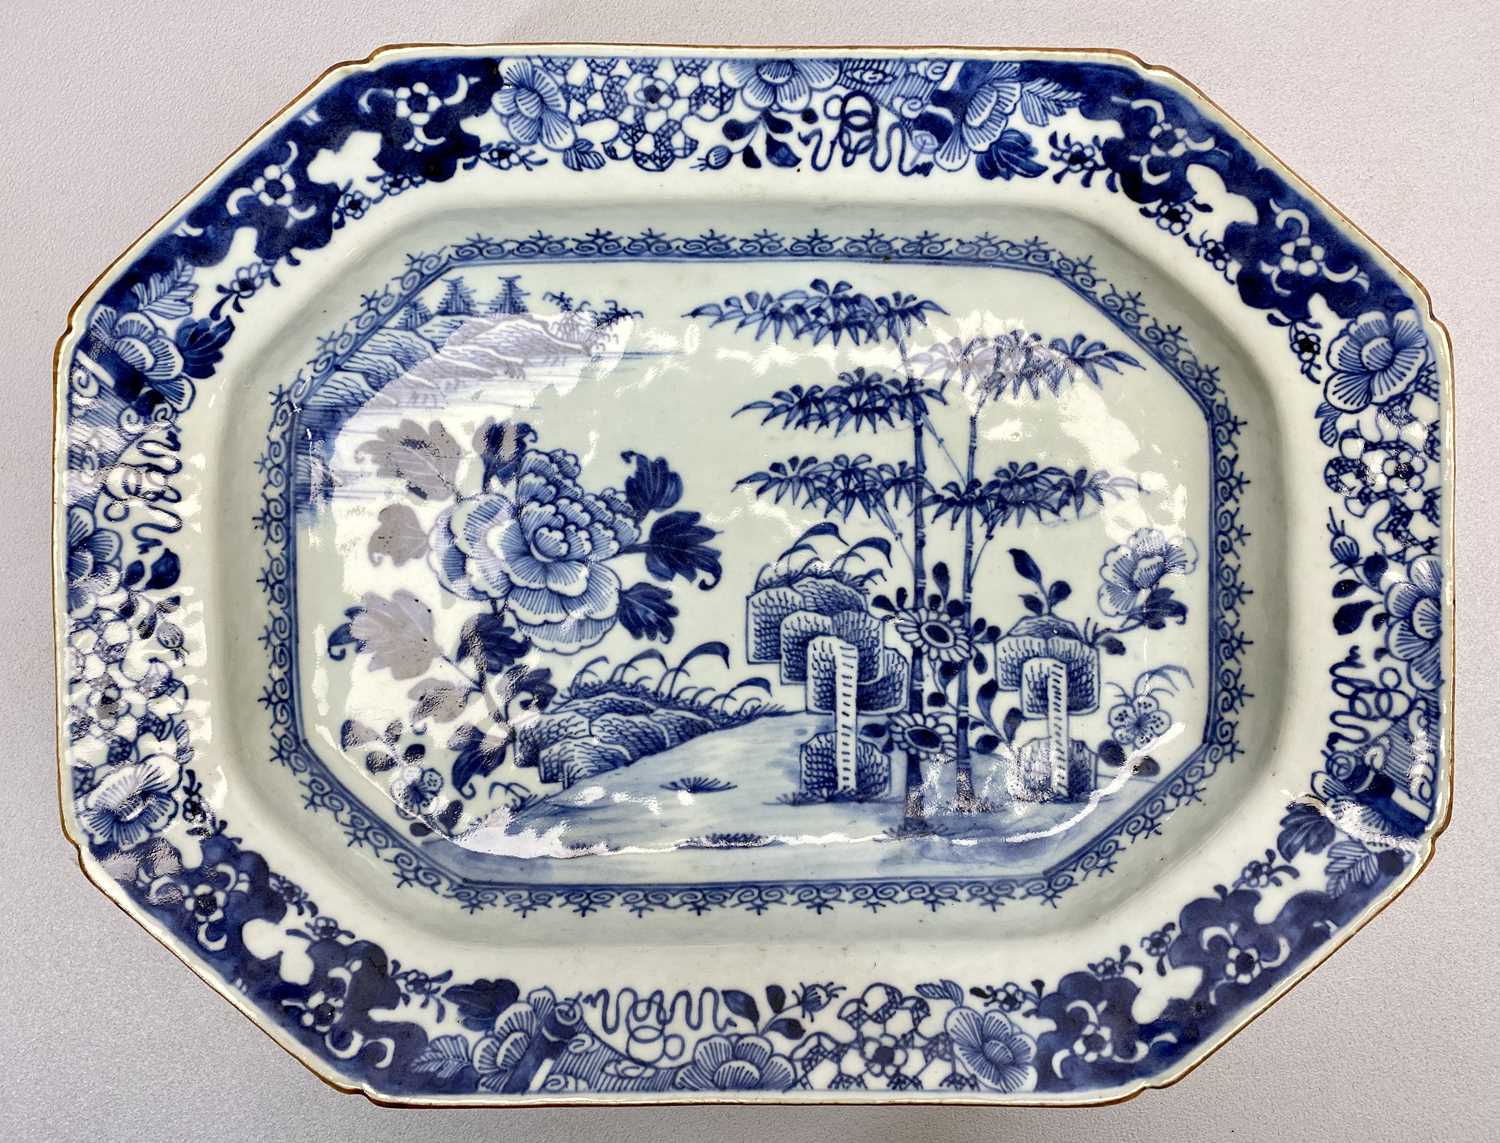 CHINESE EXPORT PORCELAIN OCTAGONAL BLUE & WHITE MEAT PLATE - Quianlong Period, garden landscape with